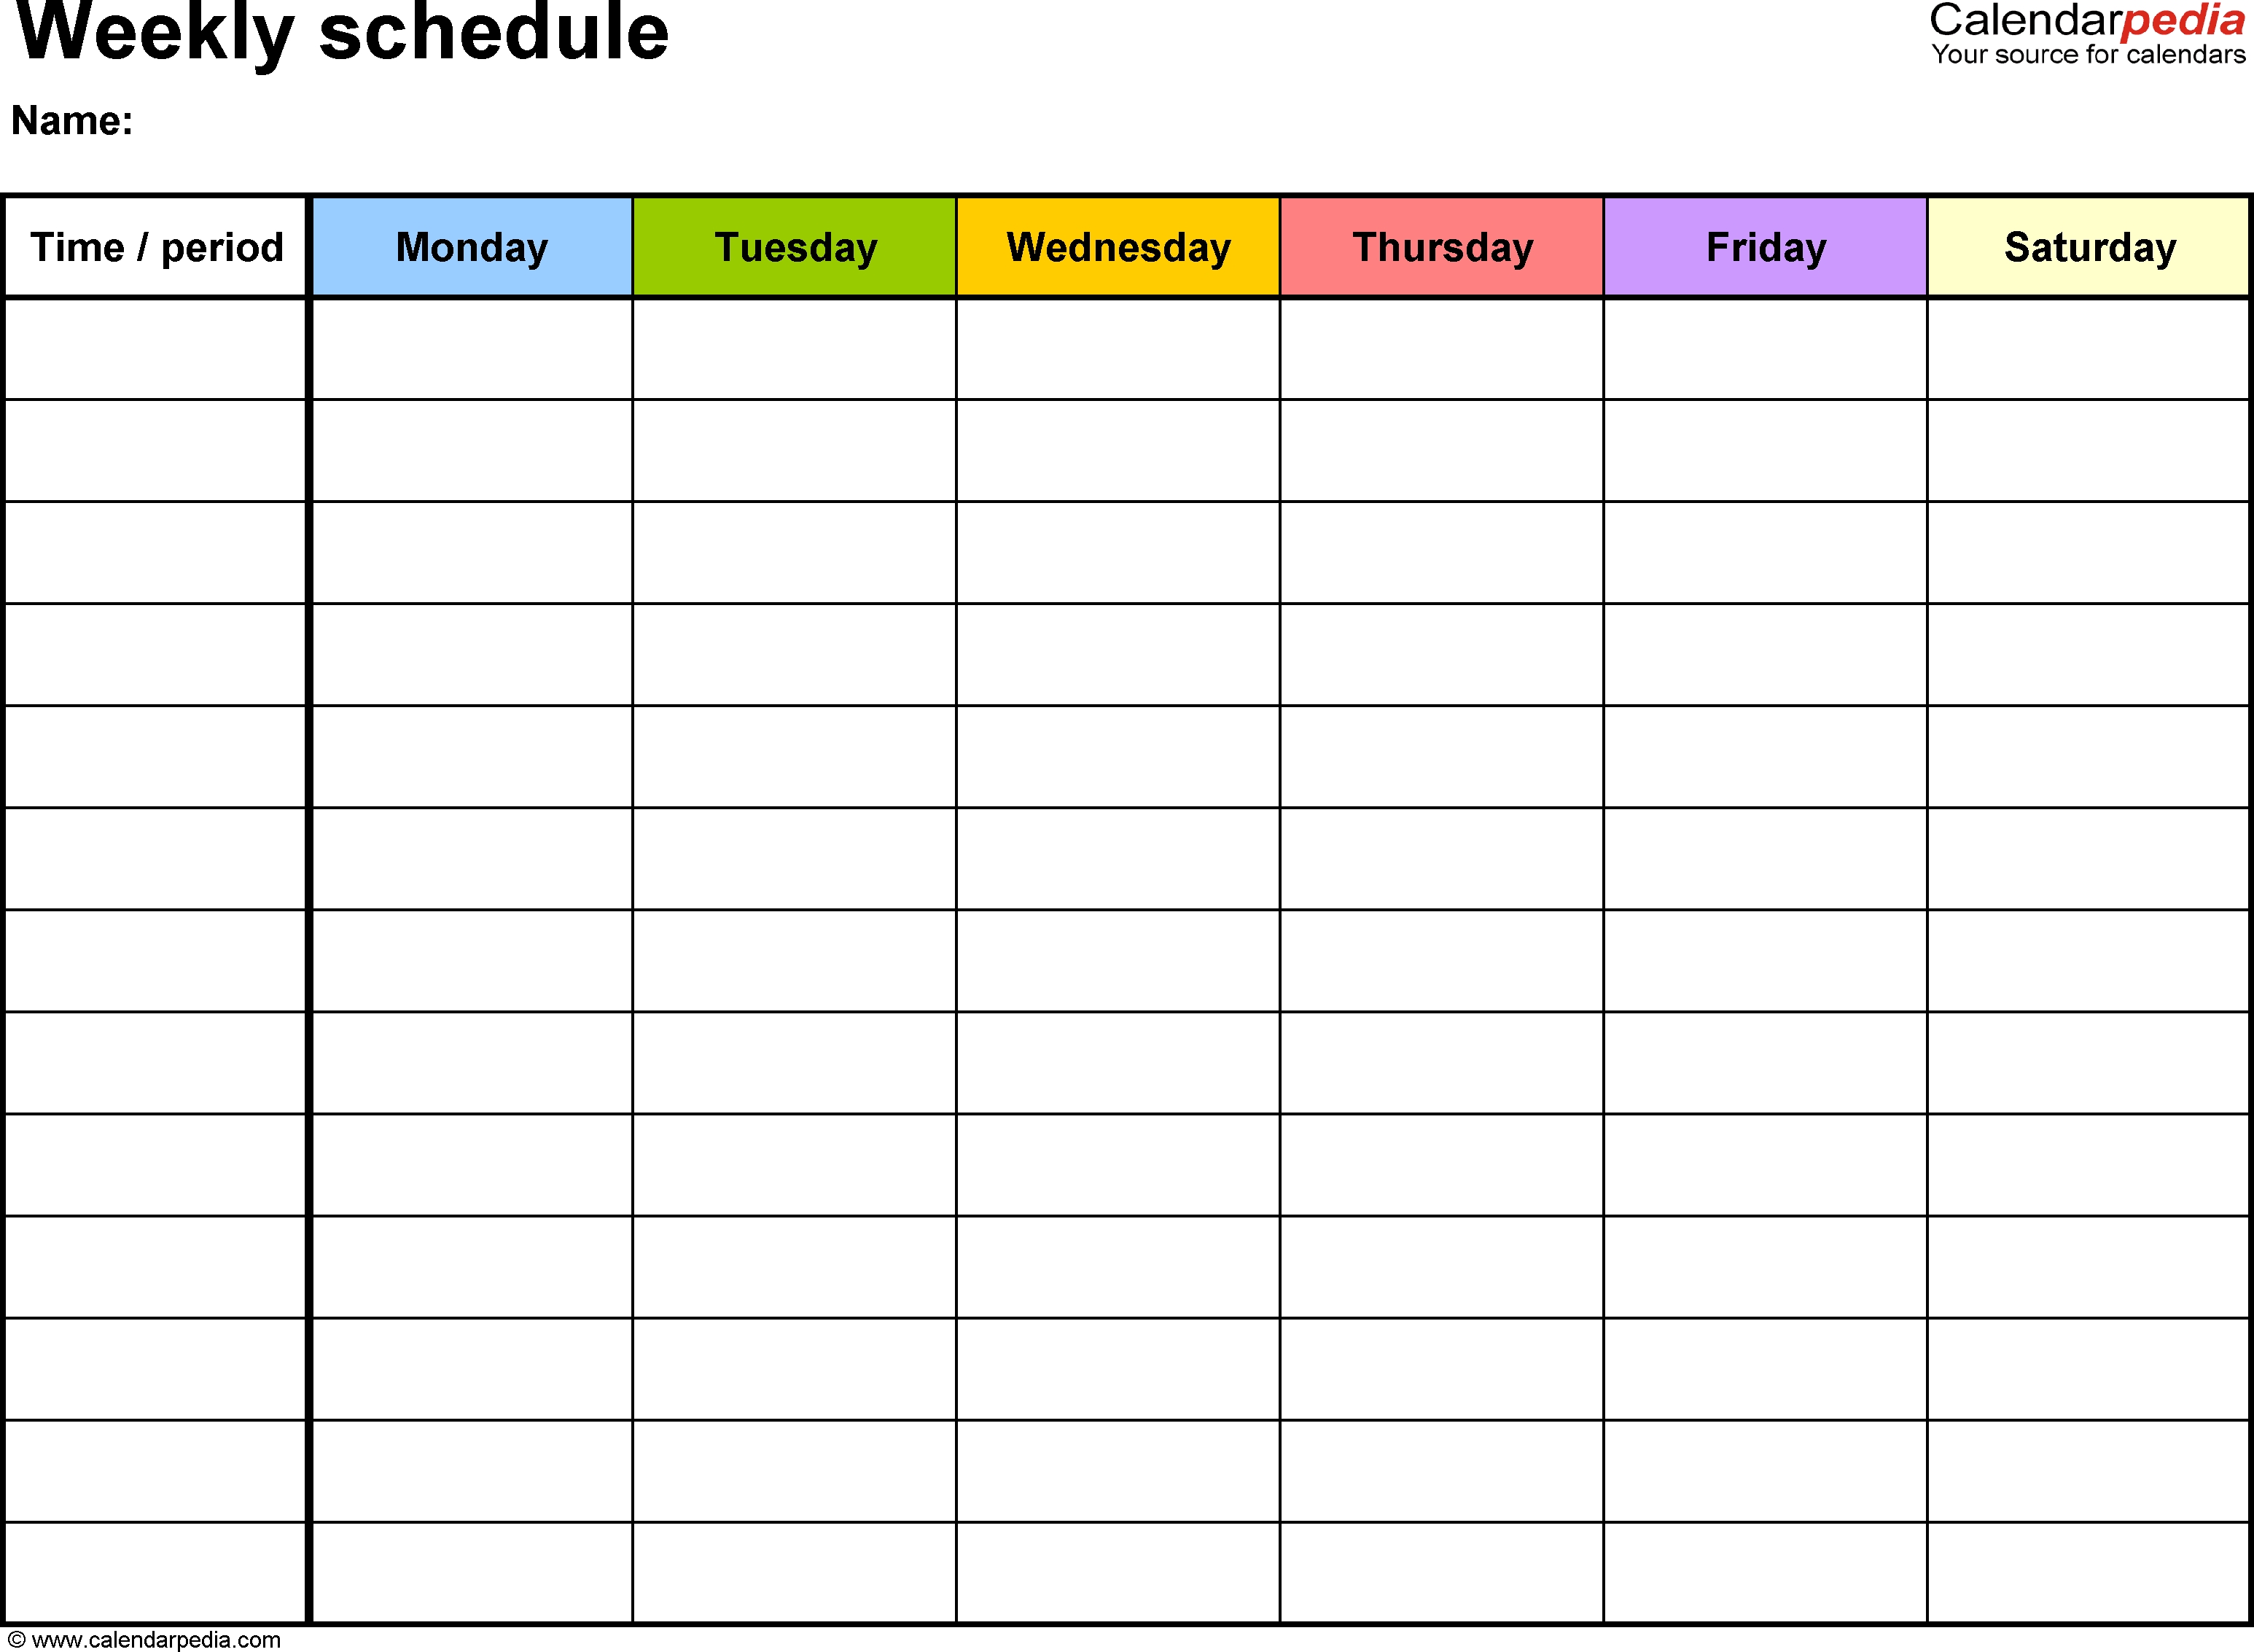 Free Weekly Schedule Templates For Word - 18 Templates intended for Weekly Agenda Monday Through Friday